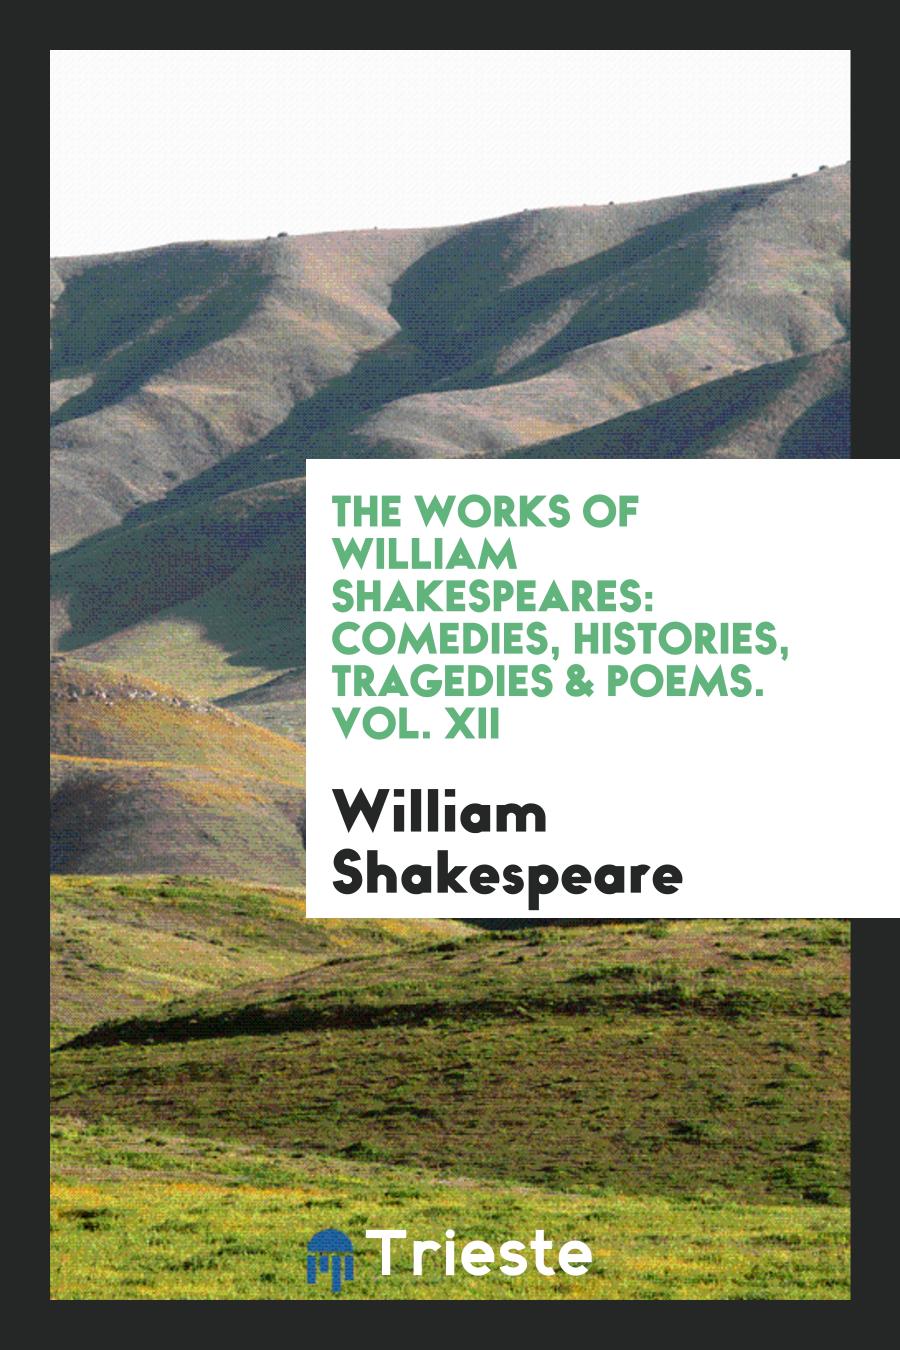 The Works of William Shakespeares: Comedies, Histories, Tragedies & Poems. Vol. XII